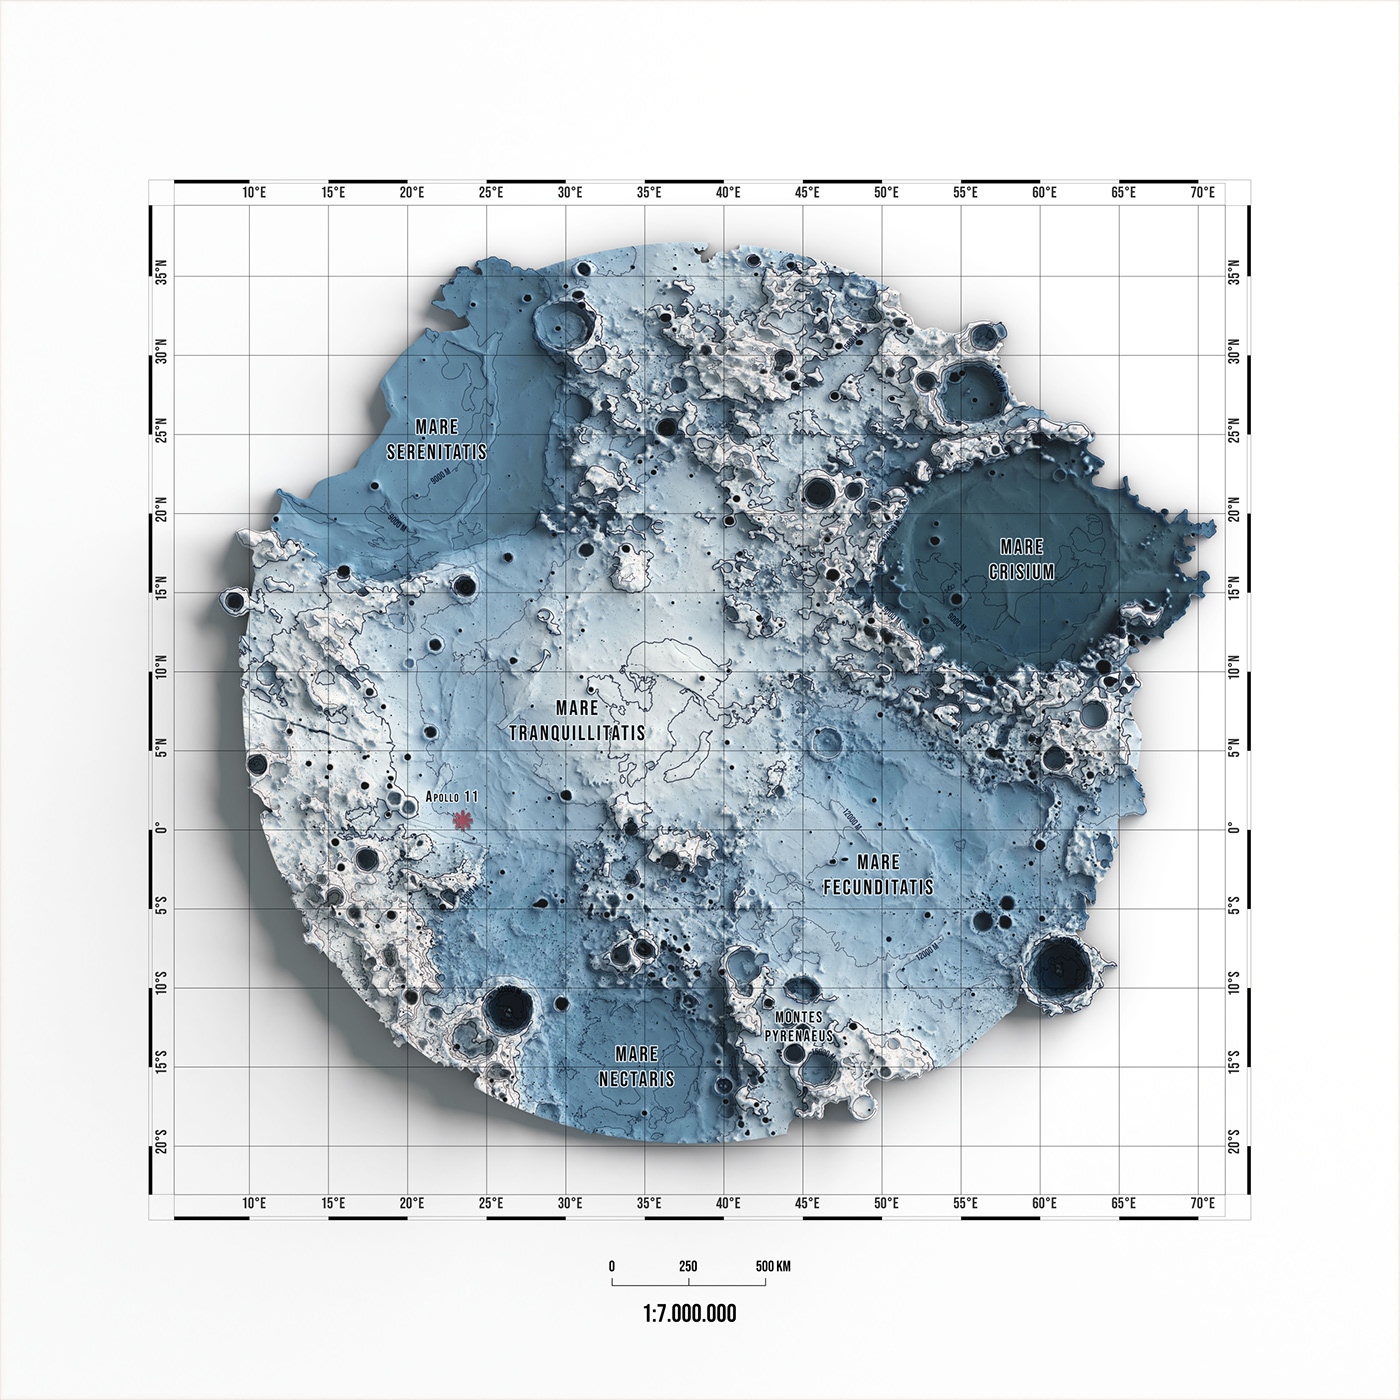 shaded relief moon topography map data visualization information design Poster Design #3D Design Apollo mission moon art space map